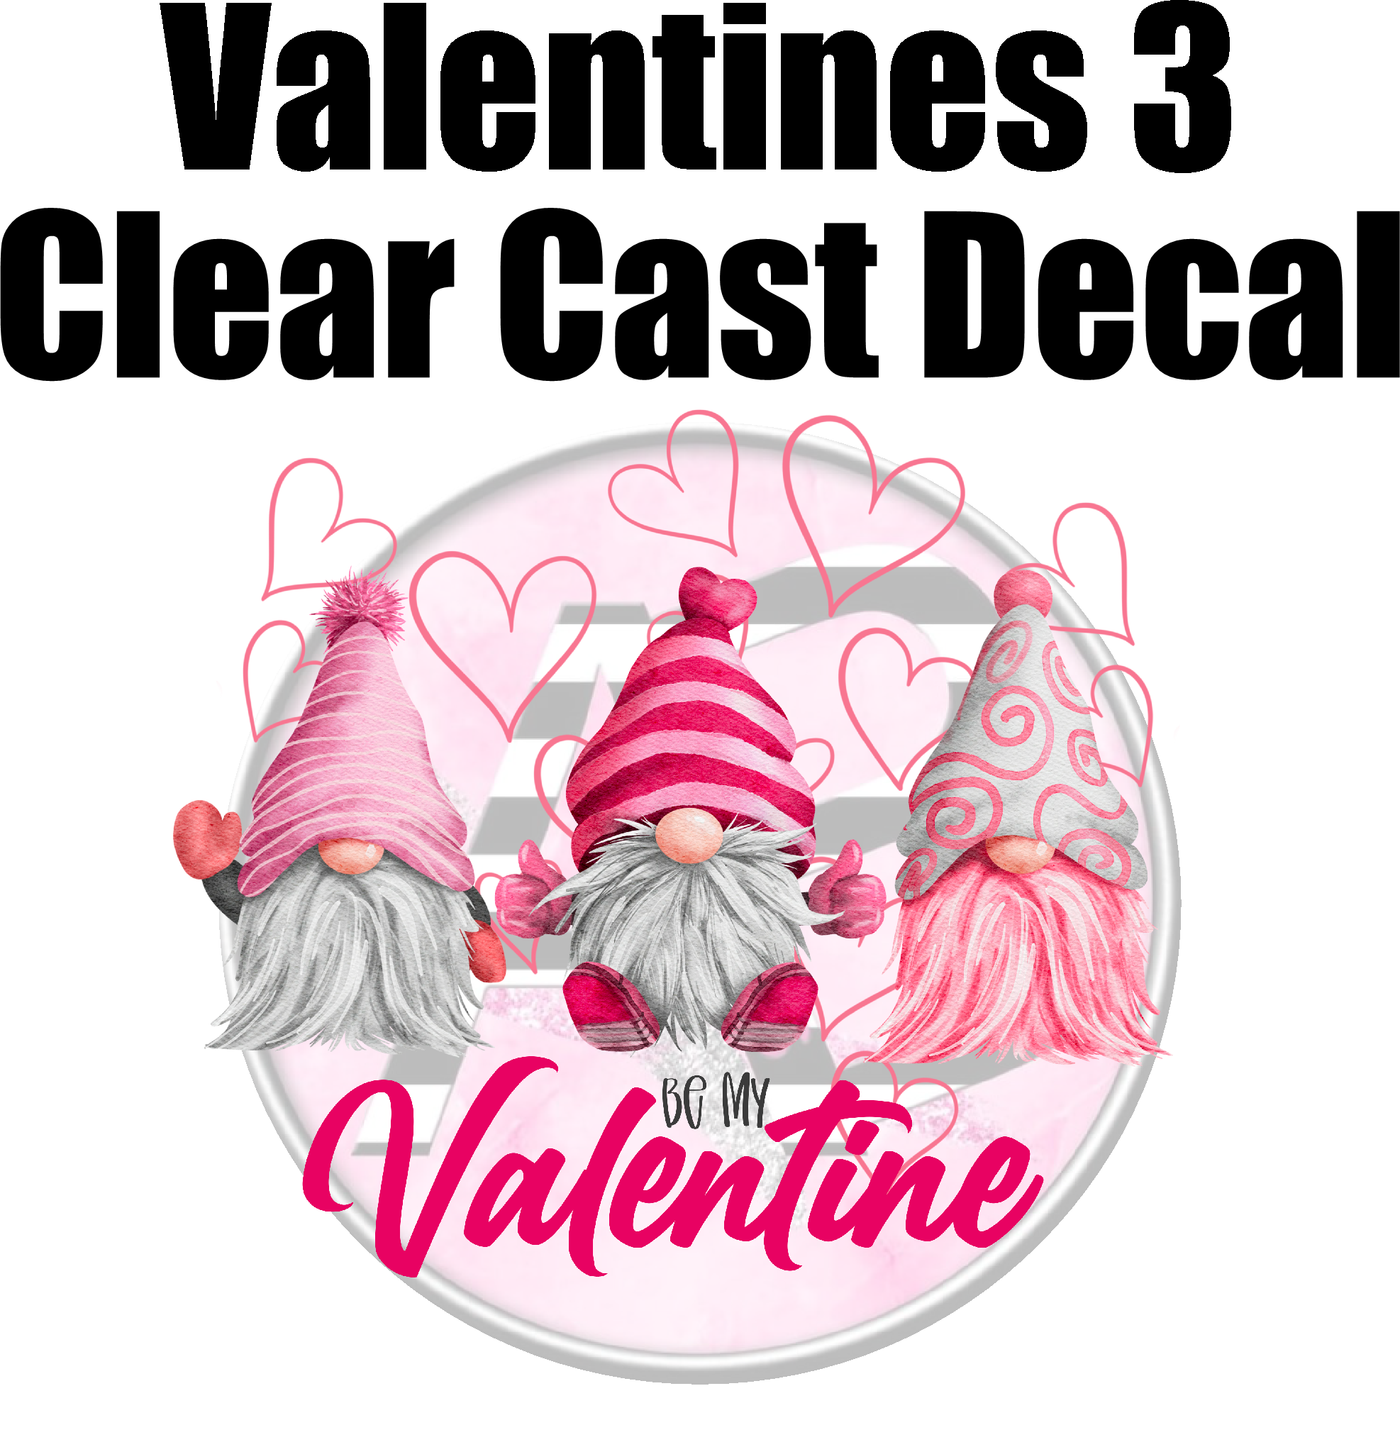 Valentines 3 - Clear Cast Decal